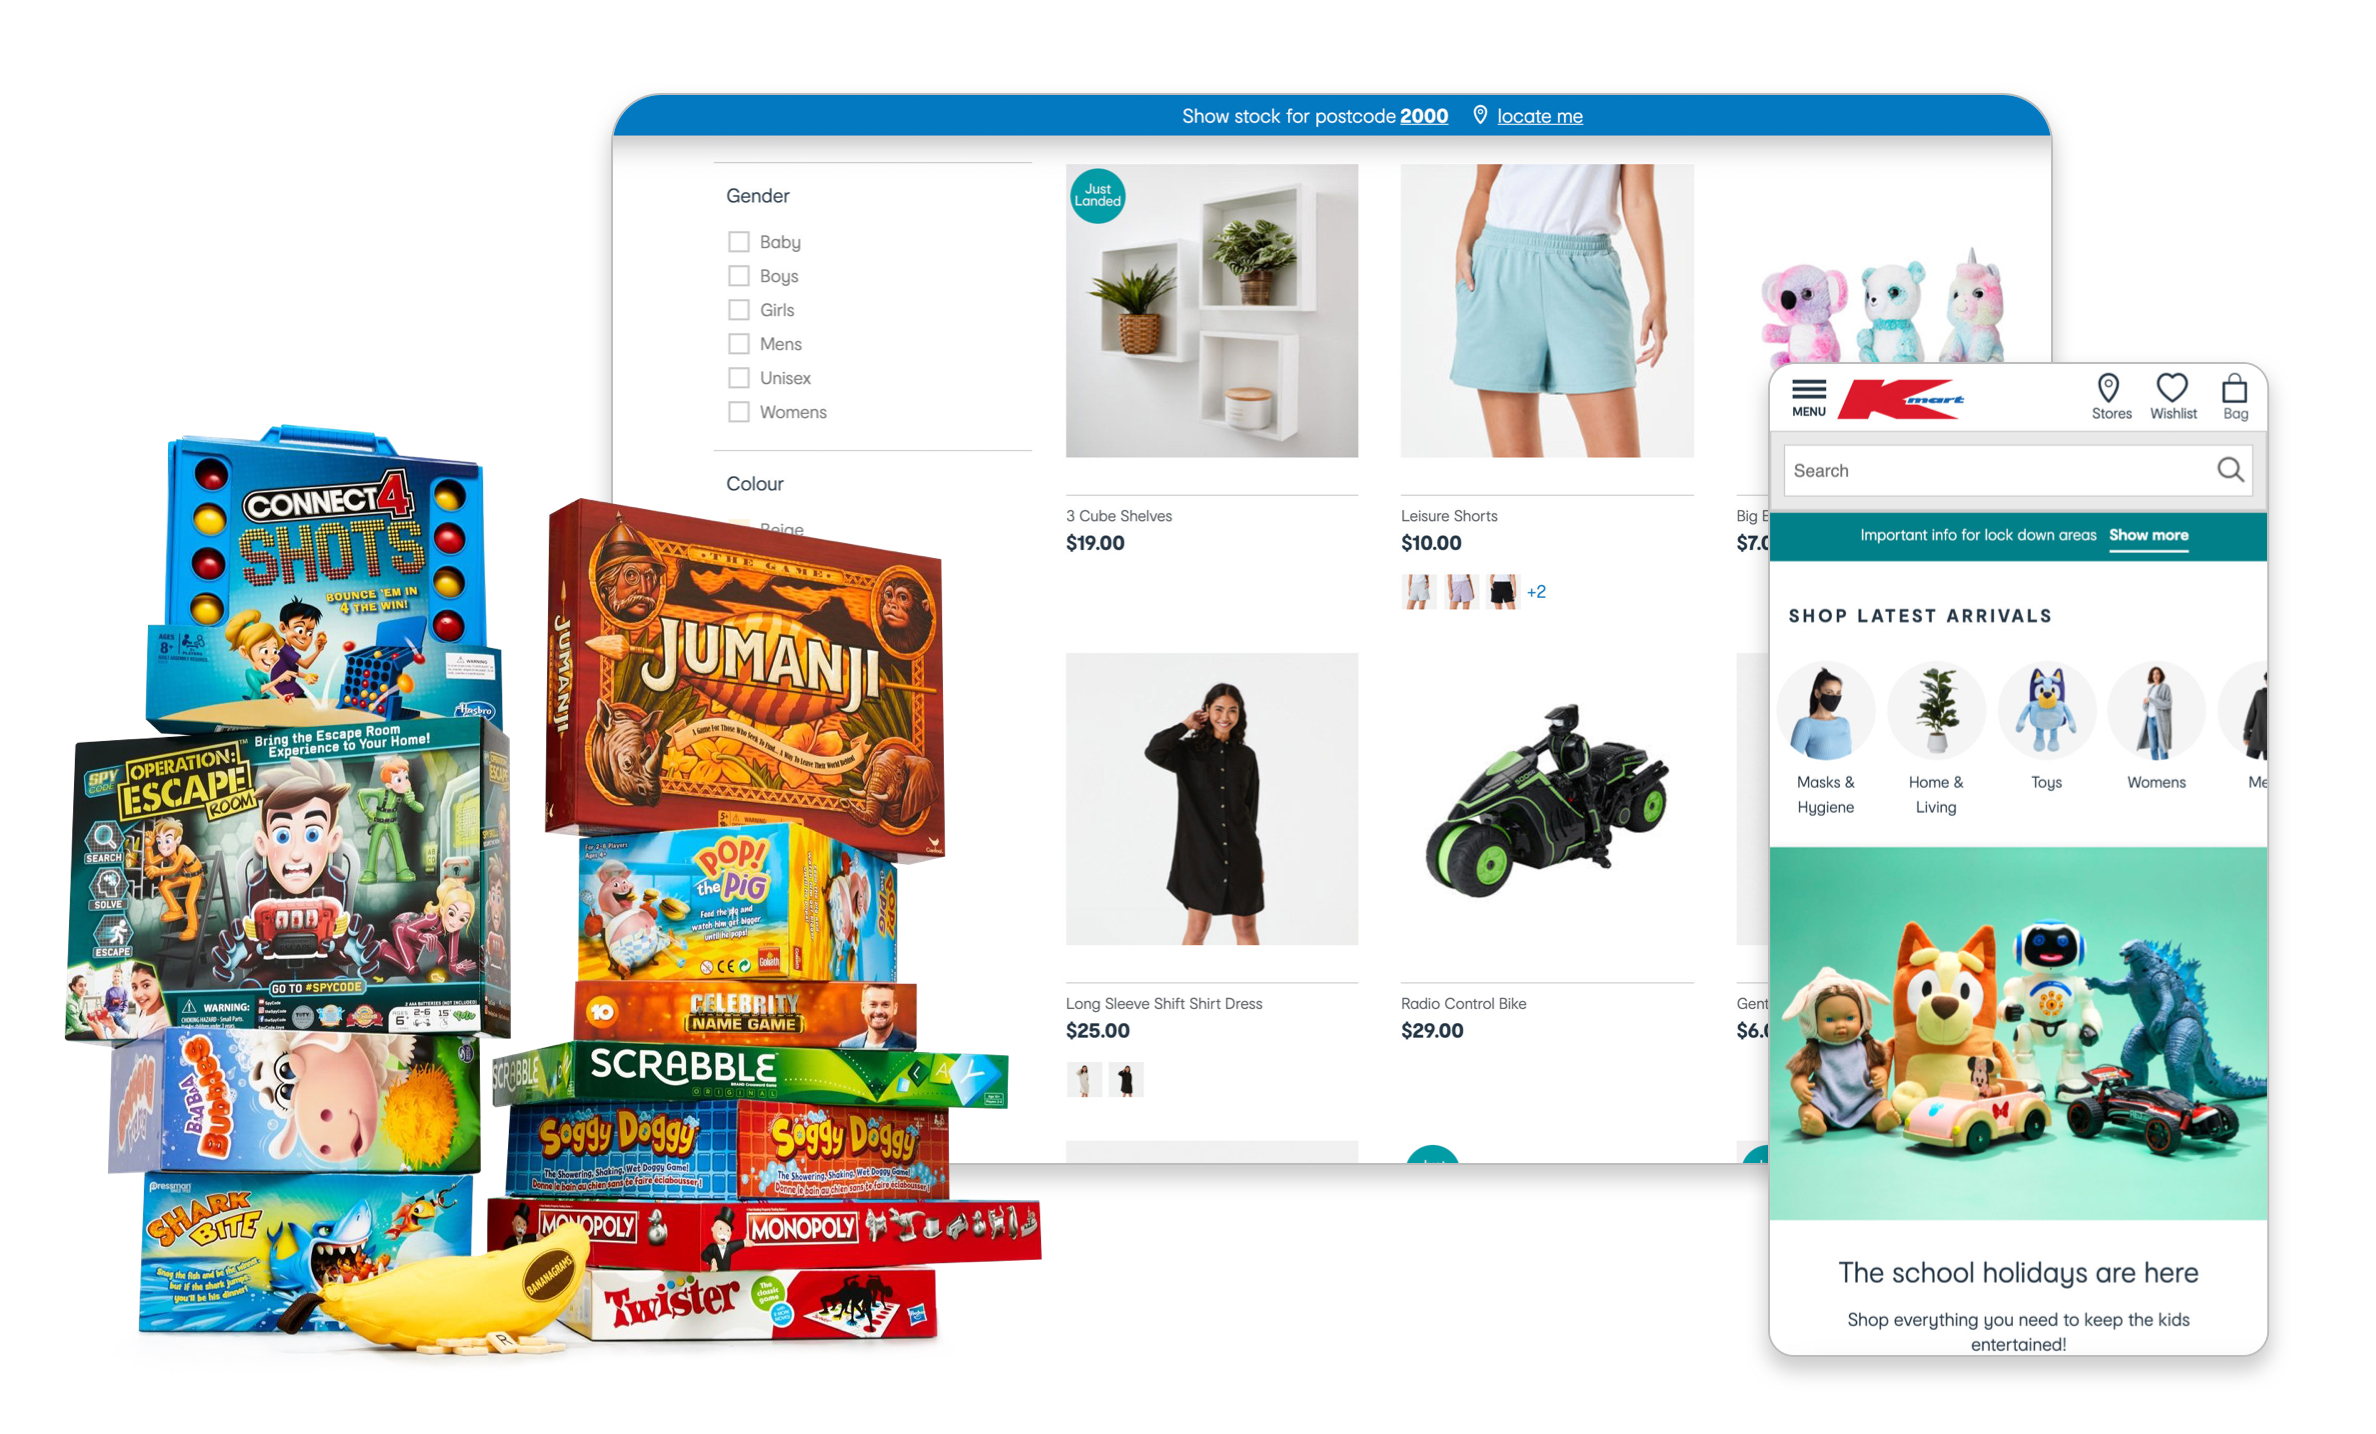 Kmart migrated to best-of-breed, future-proof, scalable digital commerce that can handle increased demands of online shopping